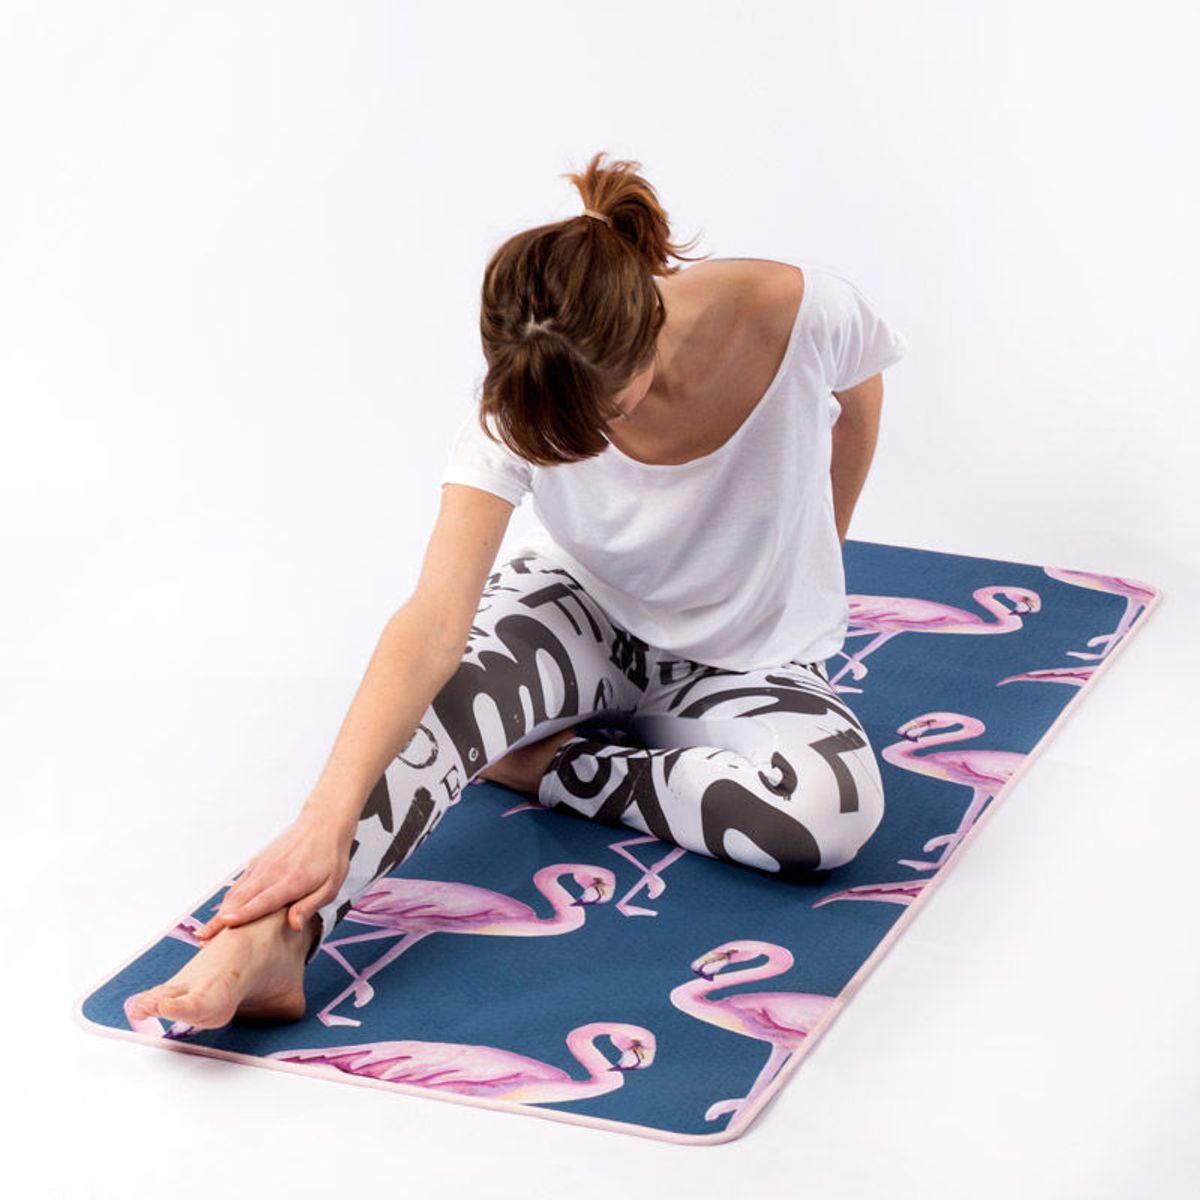  Instructional Yoga Mat with Poses Printed On It